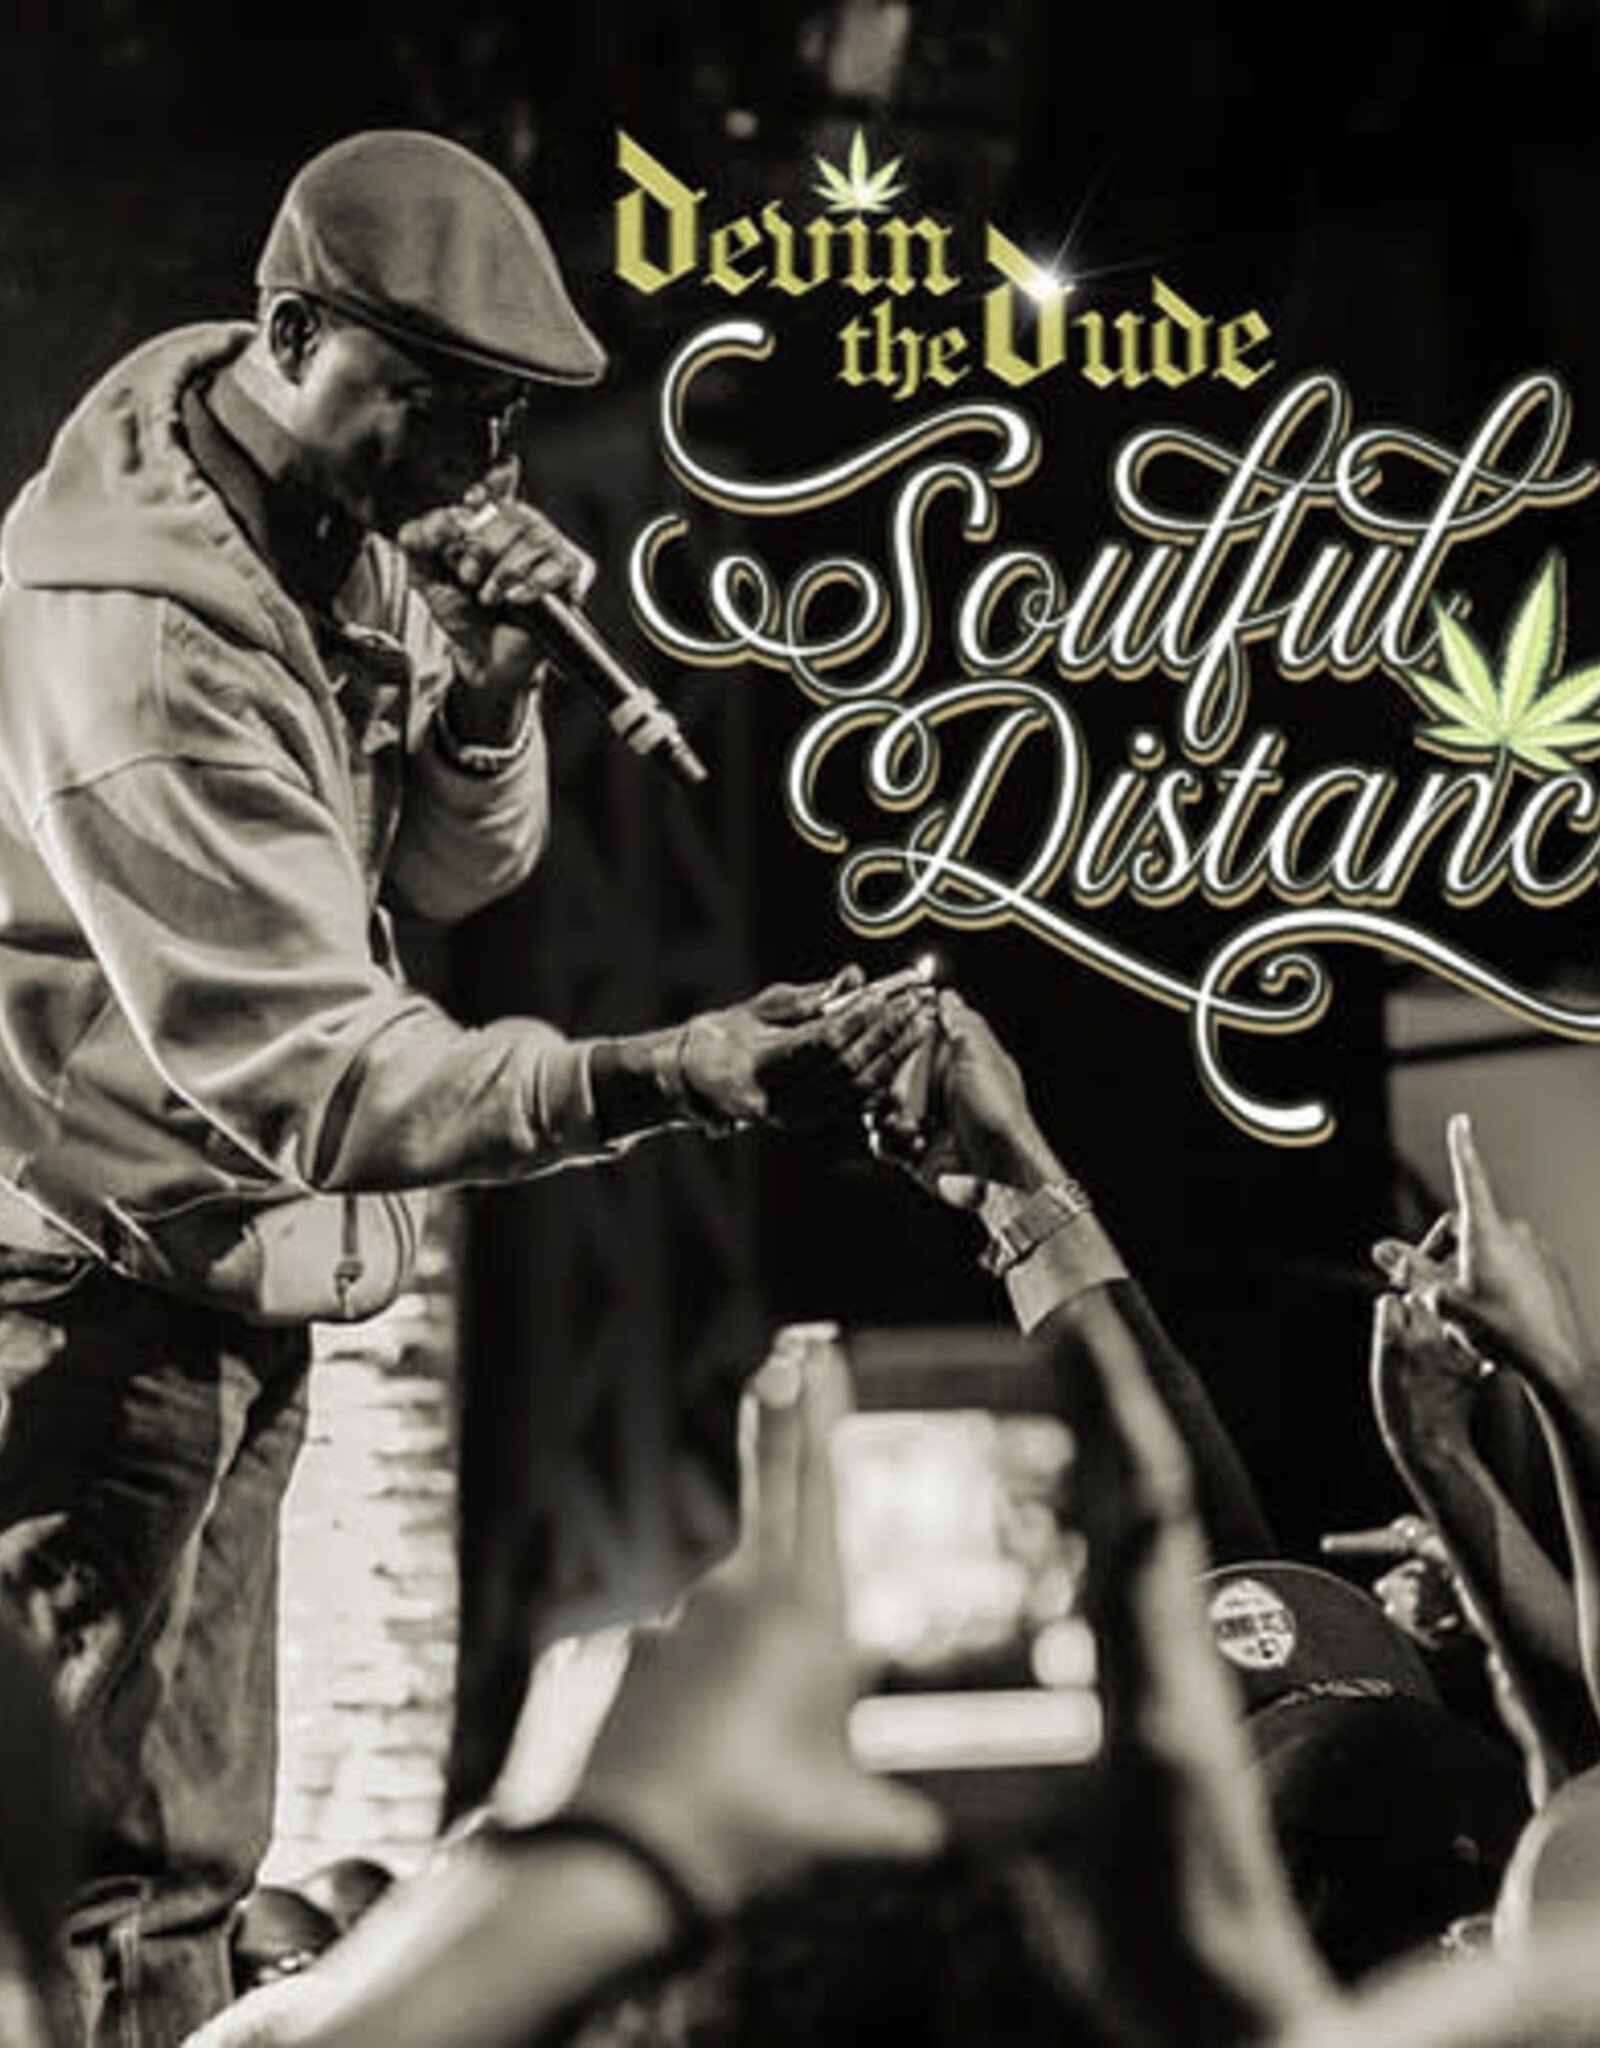 Devin the Dude - Soulful Distance